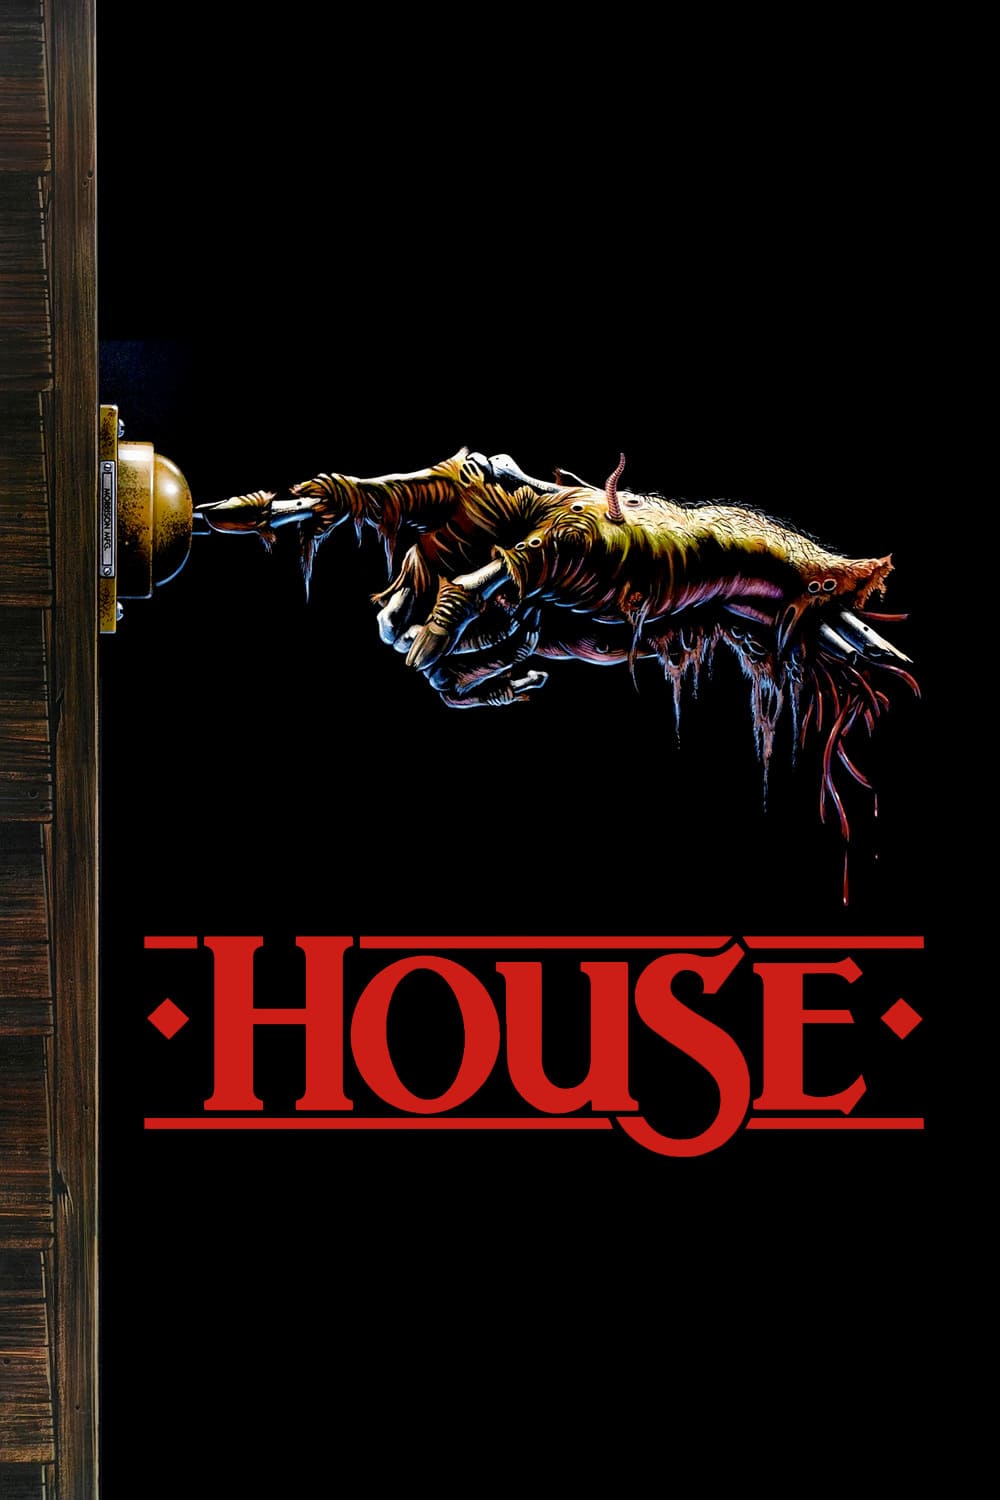 Poster for the movie "House"